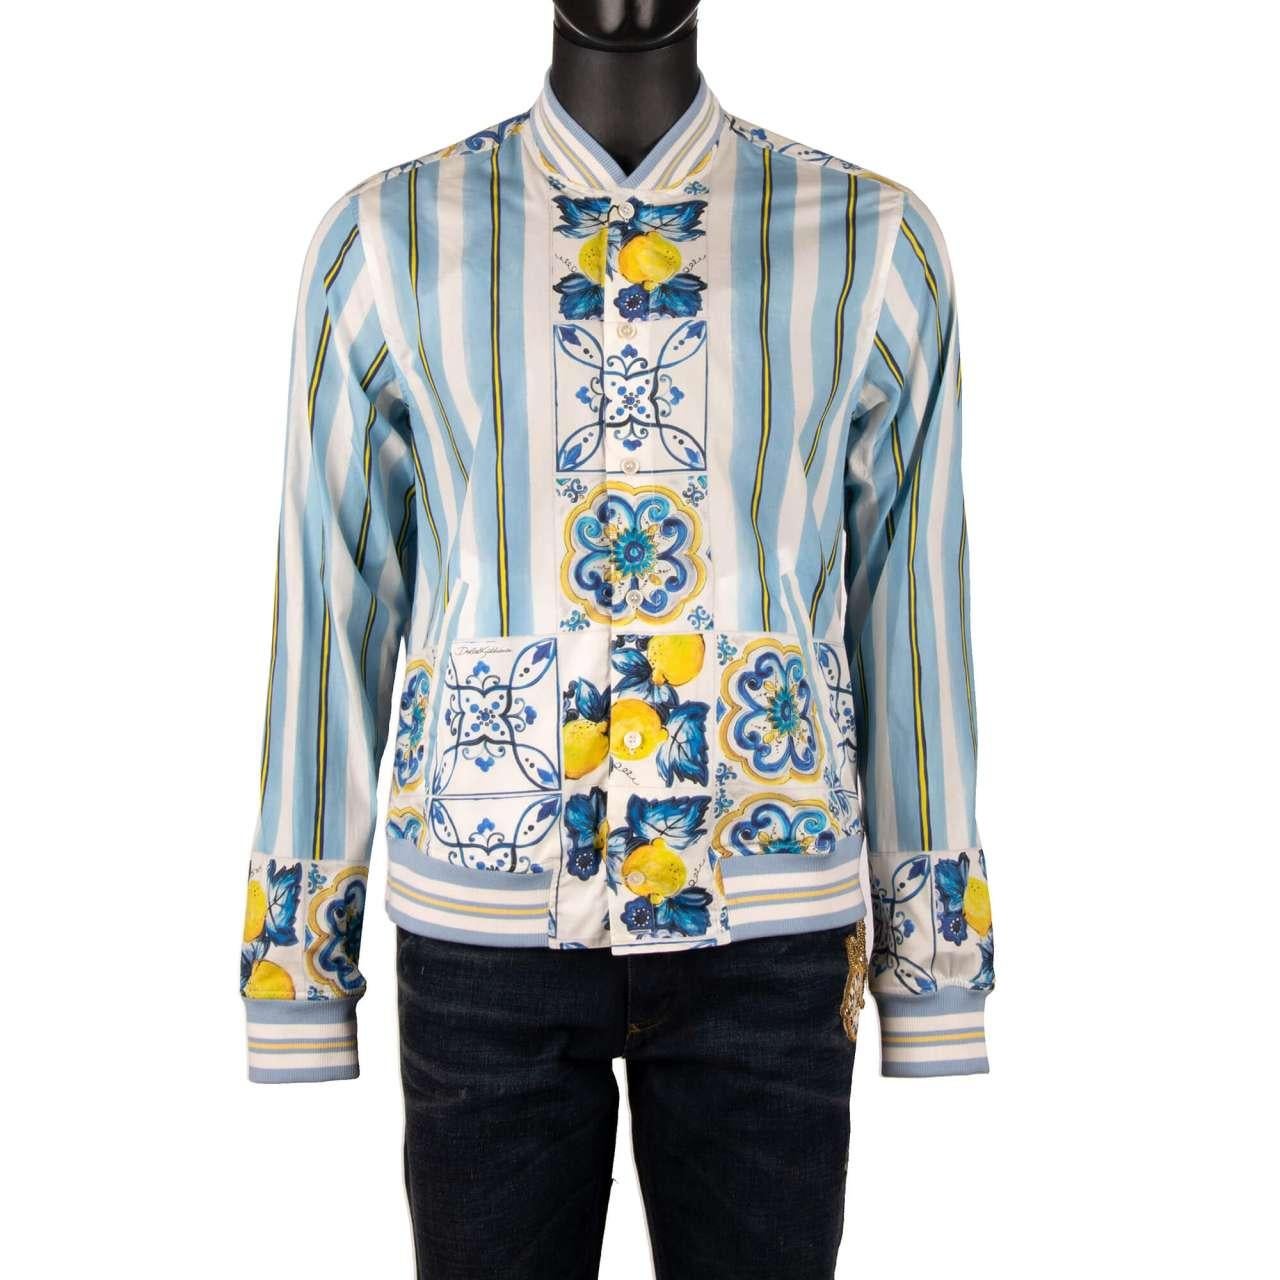 - Cotton jacket style shirt with Majolica and striped Print in blue, yellow and white and by DOLCE & GABBANA - New with tag - Former RRP: EUR 789 - MADE IN ITALY - Regular F- Model: G5FG7T-HP5OJ-HCH1G - Material: 100% Cotton - Color: Blue / Yellow /